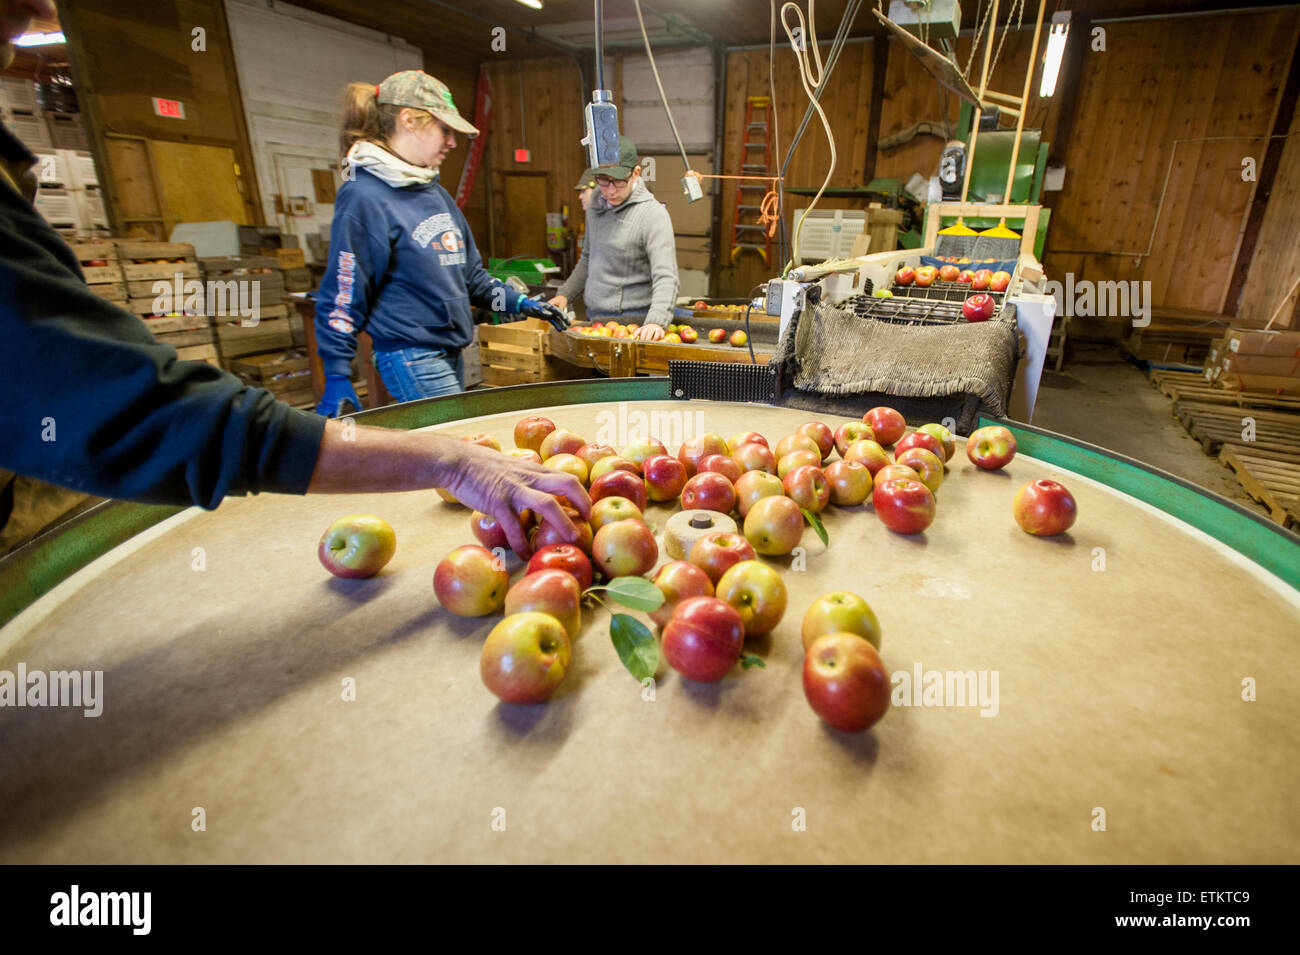 People sorting apples at an orchard in Wexford, Pennsylvania, USA Stock Photo